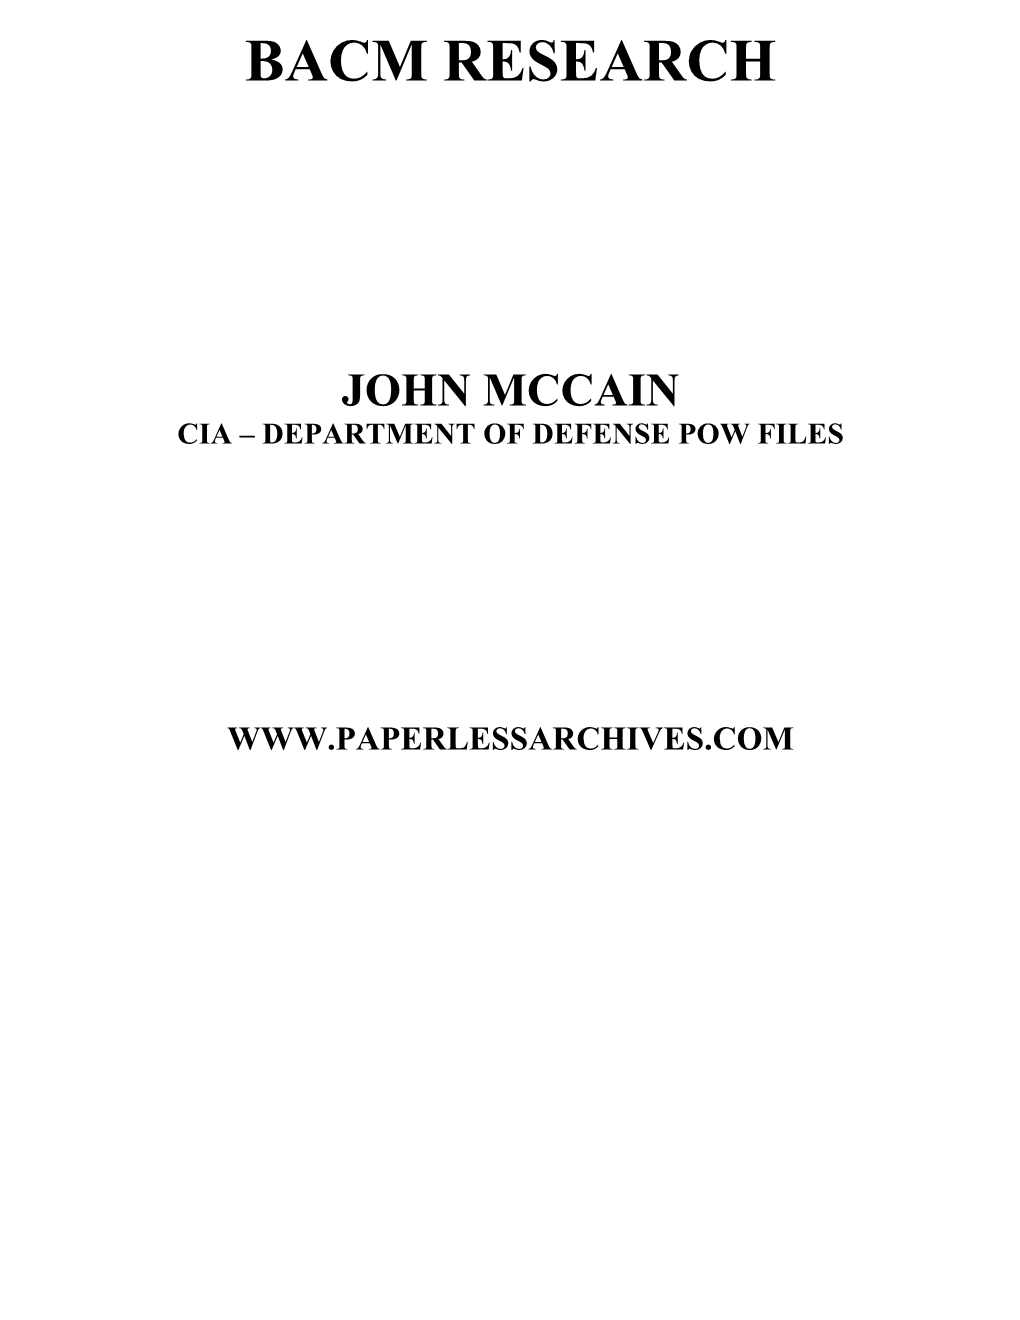 John Mccain Vietnam War POW CIA - Department of Defense Files by BACM Research Is Licensed Under a Creative Commons Attribution 3.0 United States License